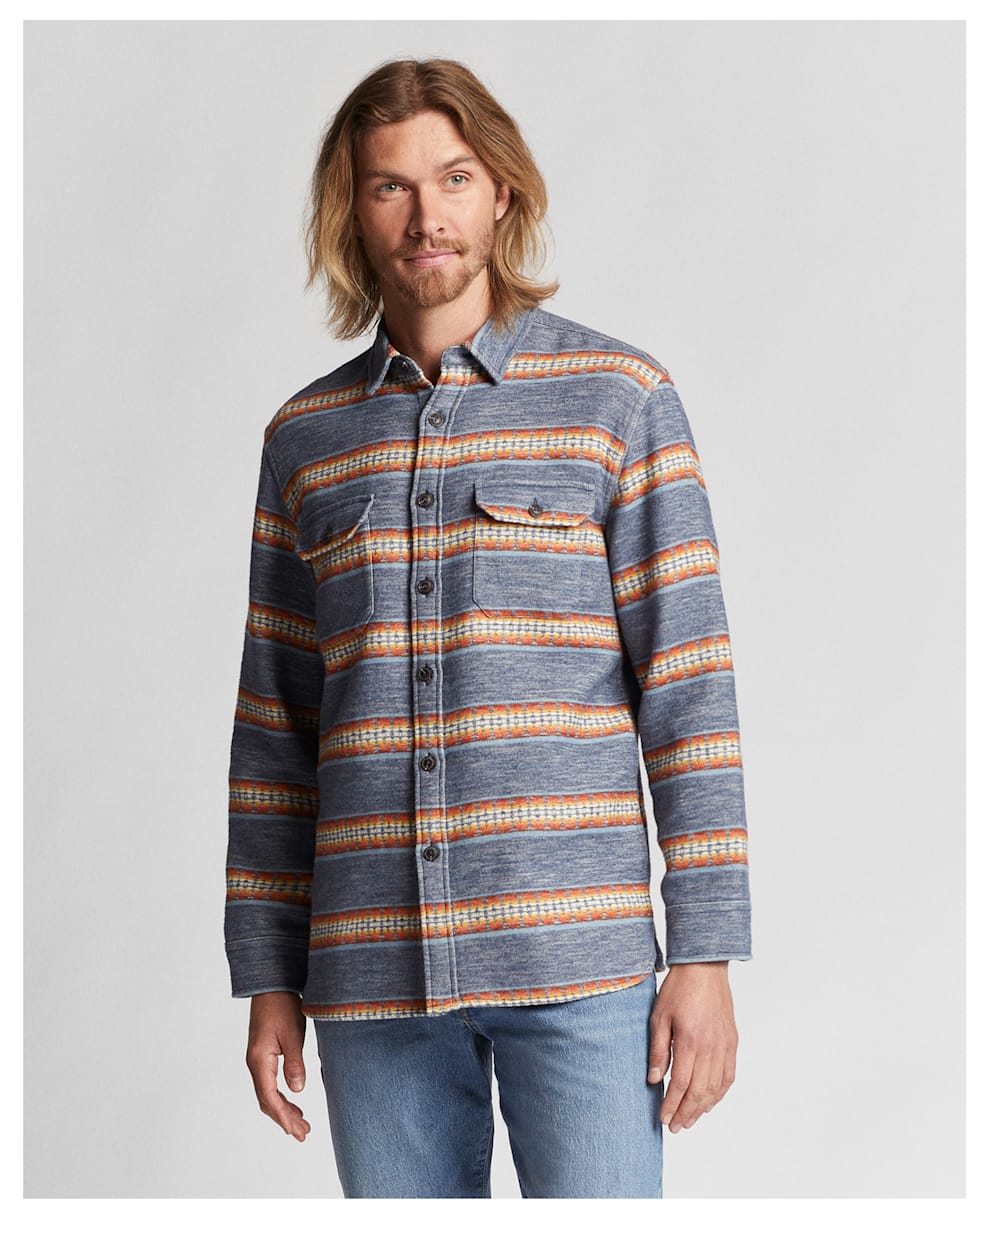 ALTERNATE VIEW OF MEN'S DOUBLESOFT DRIFTWOOD SHIRT IN BLUE PINTO MOUNTAINS image number 6